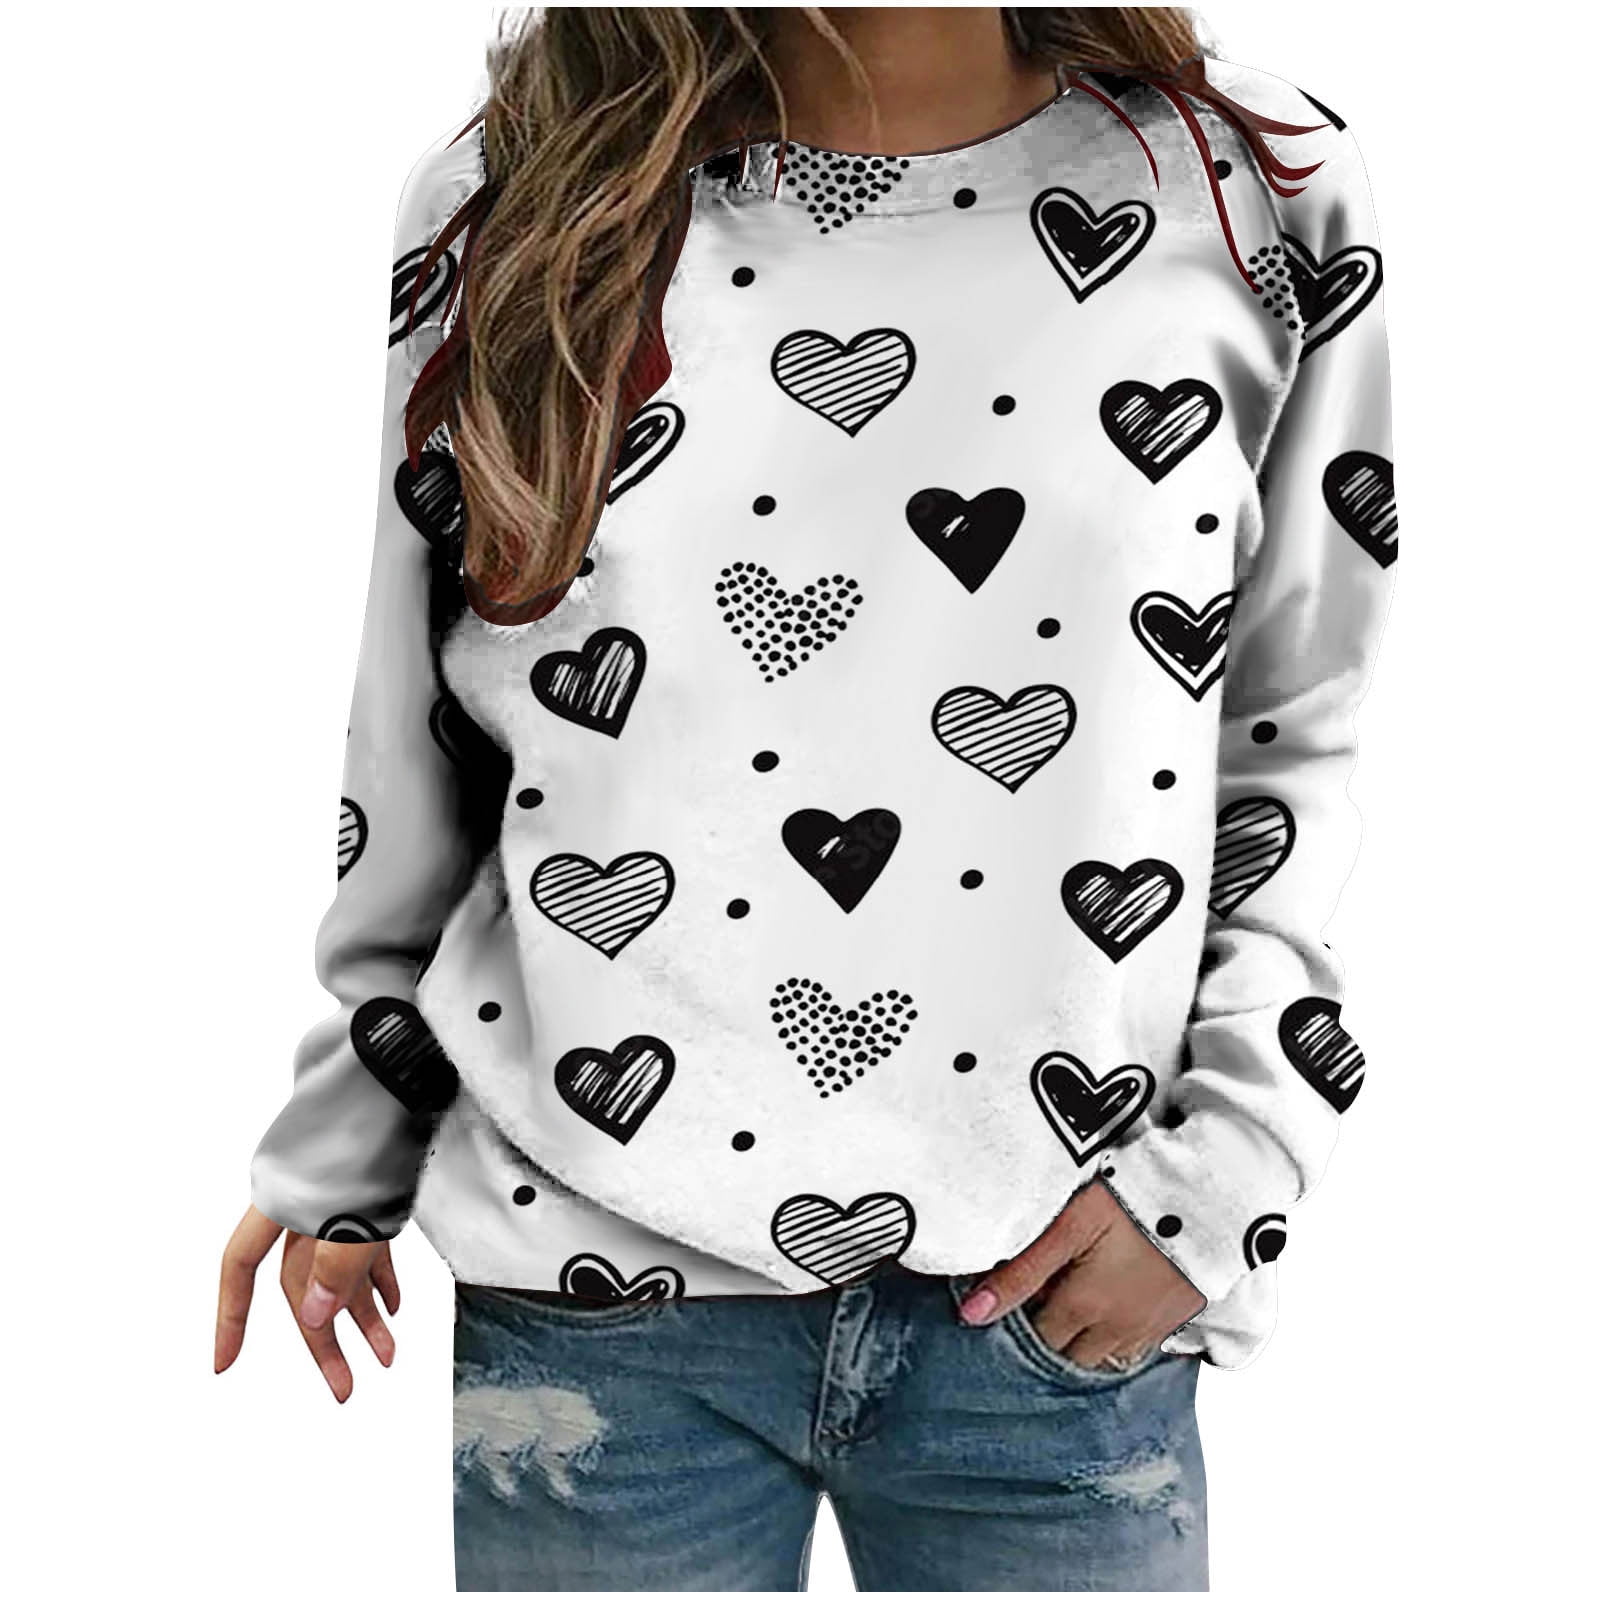 Clearance Womens Sequin Print Long Sleeve Sweatshirts Fashion Raglan  Crewneck Tops Valentine's Day Heart Shirts  Clearance Items Outlet 90